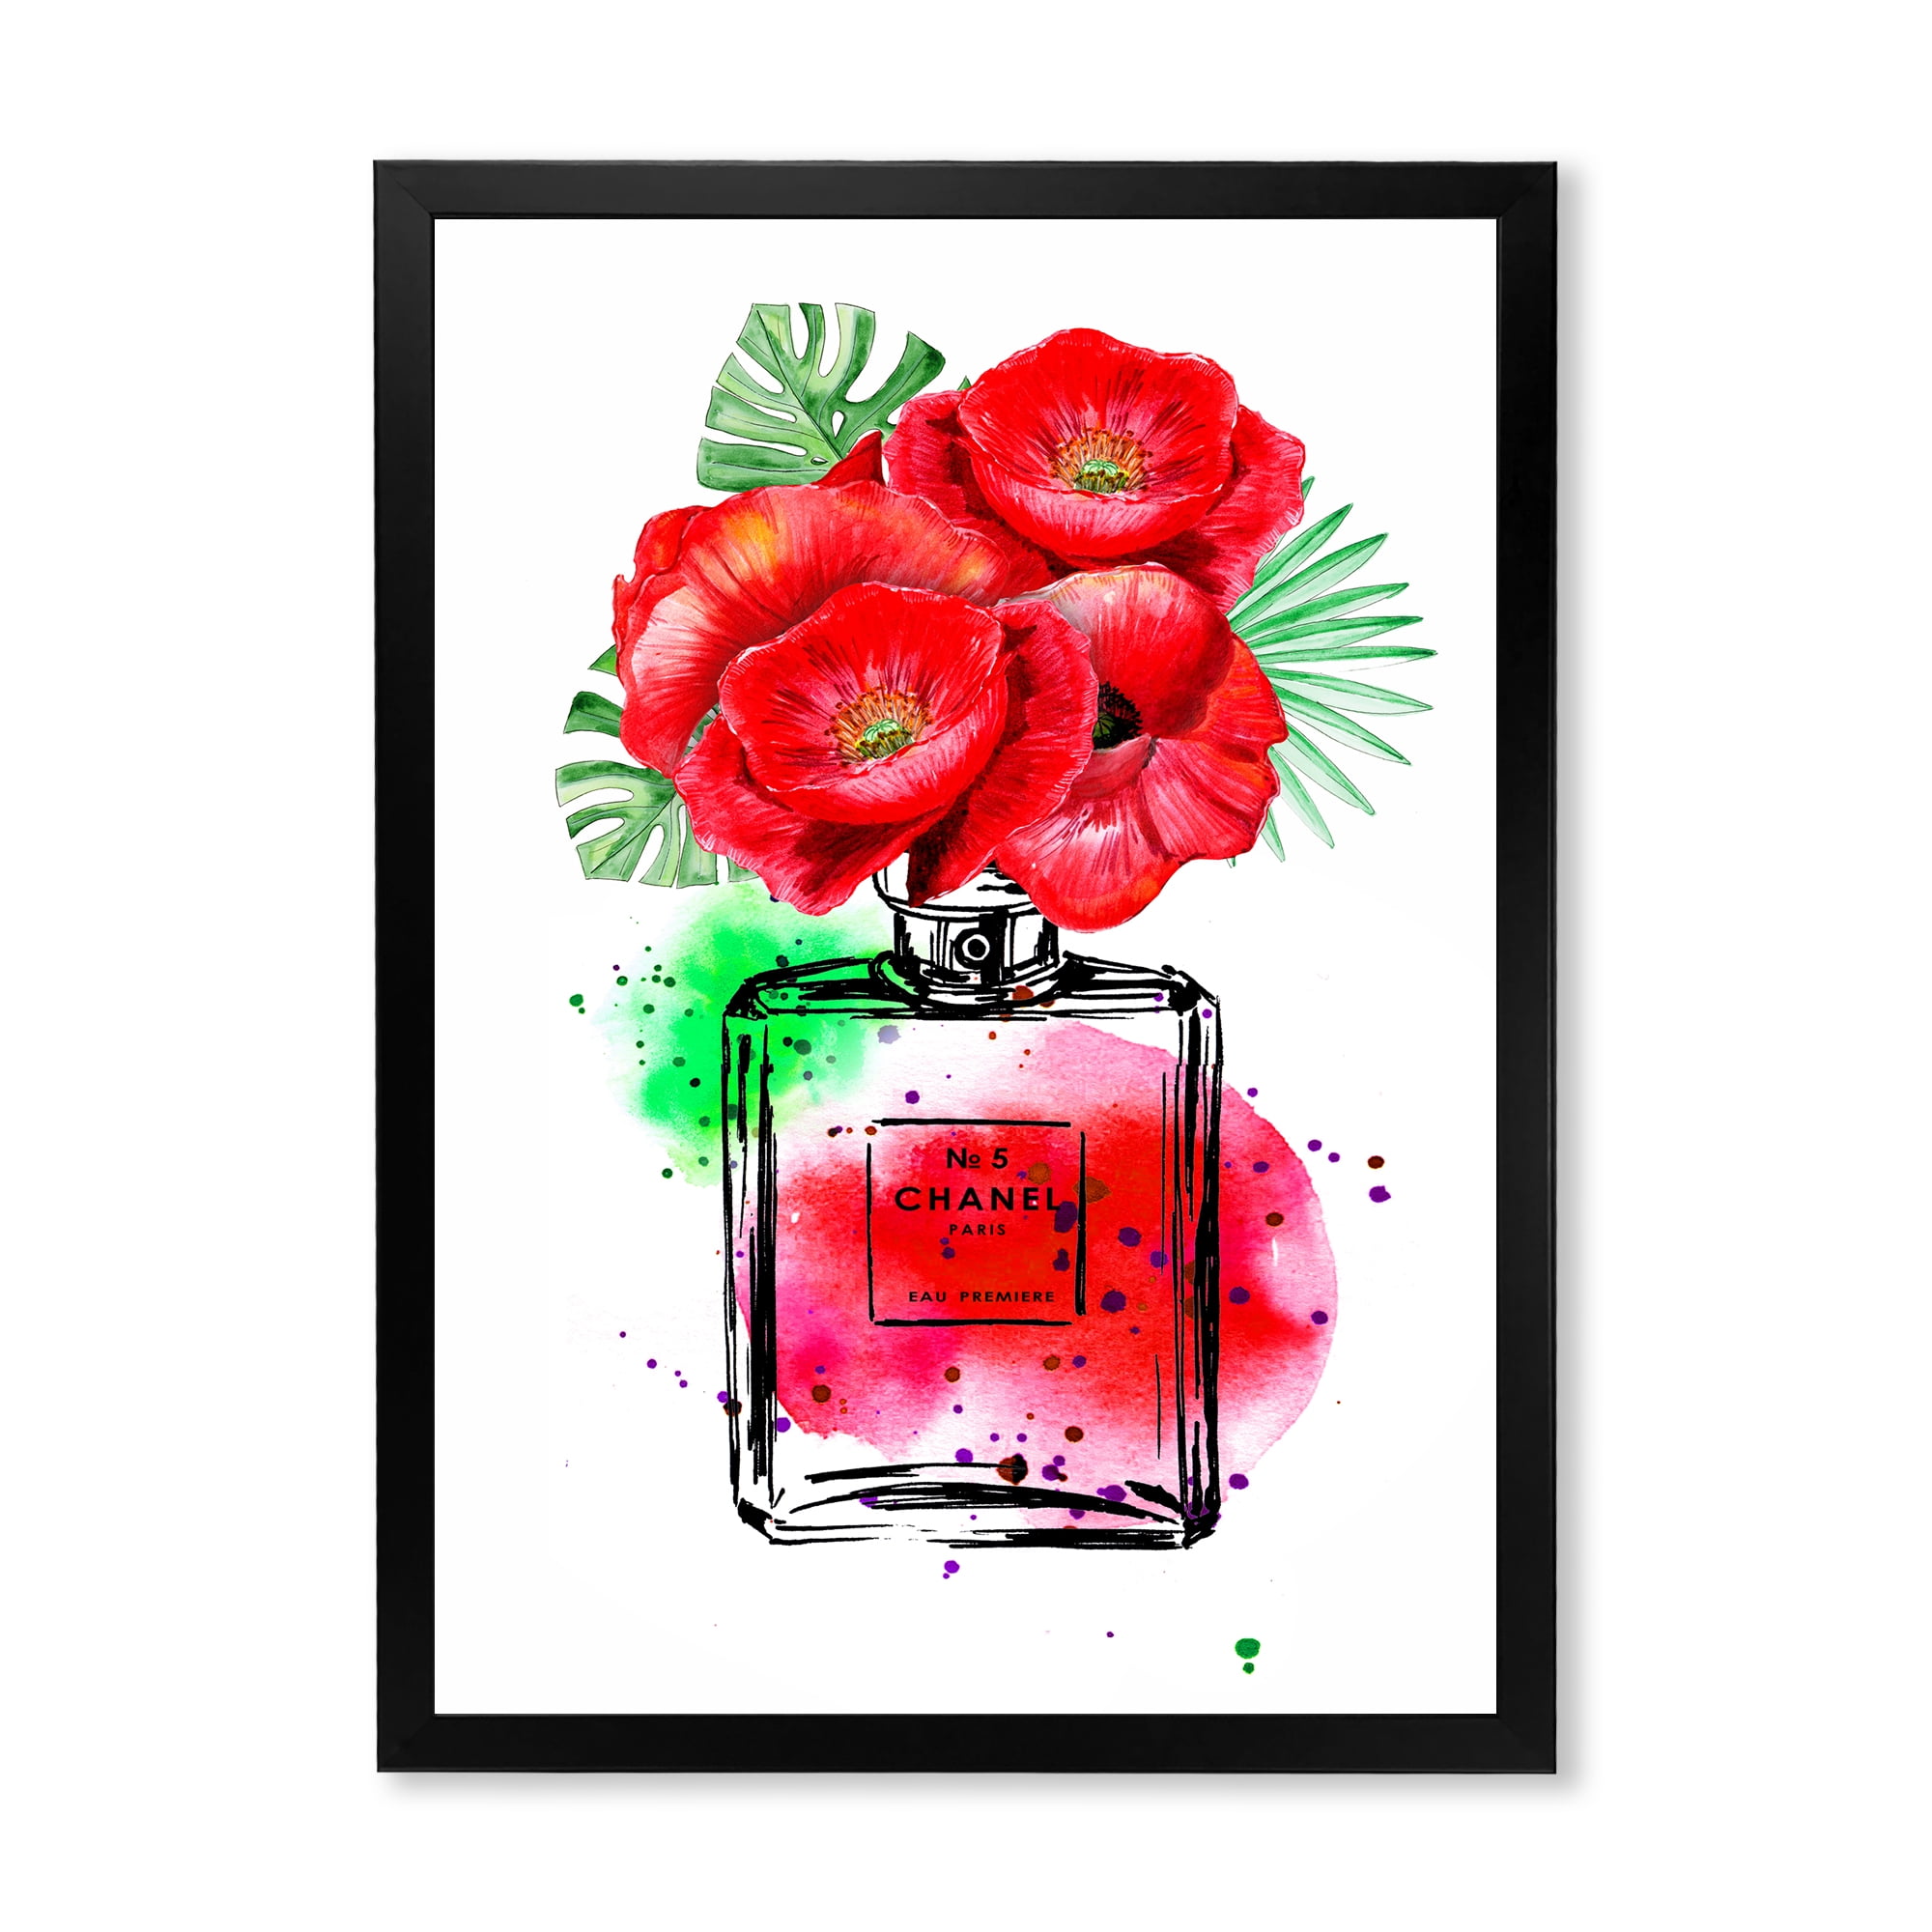 Designart 'Perfume Chanel Five with Red Flowers' Modern Framed Art Print, Size: 30 x 40